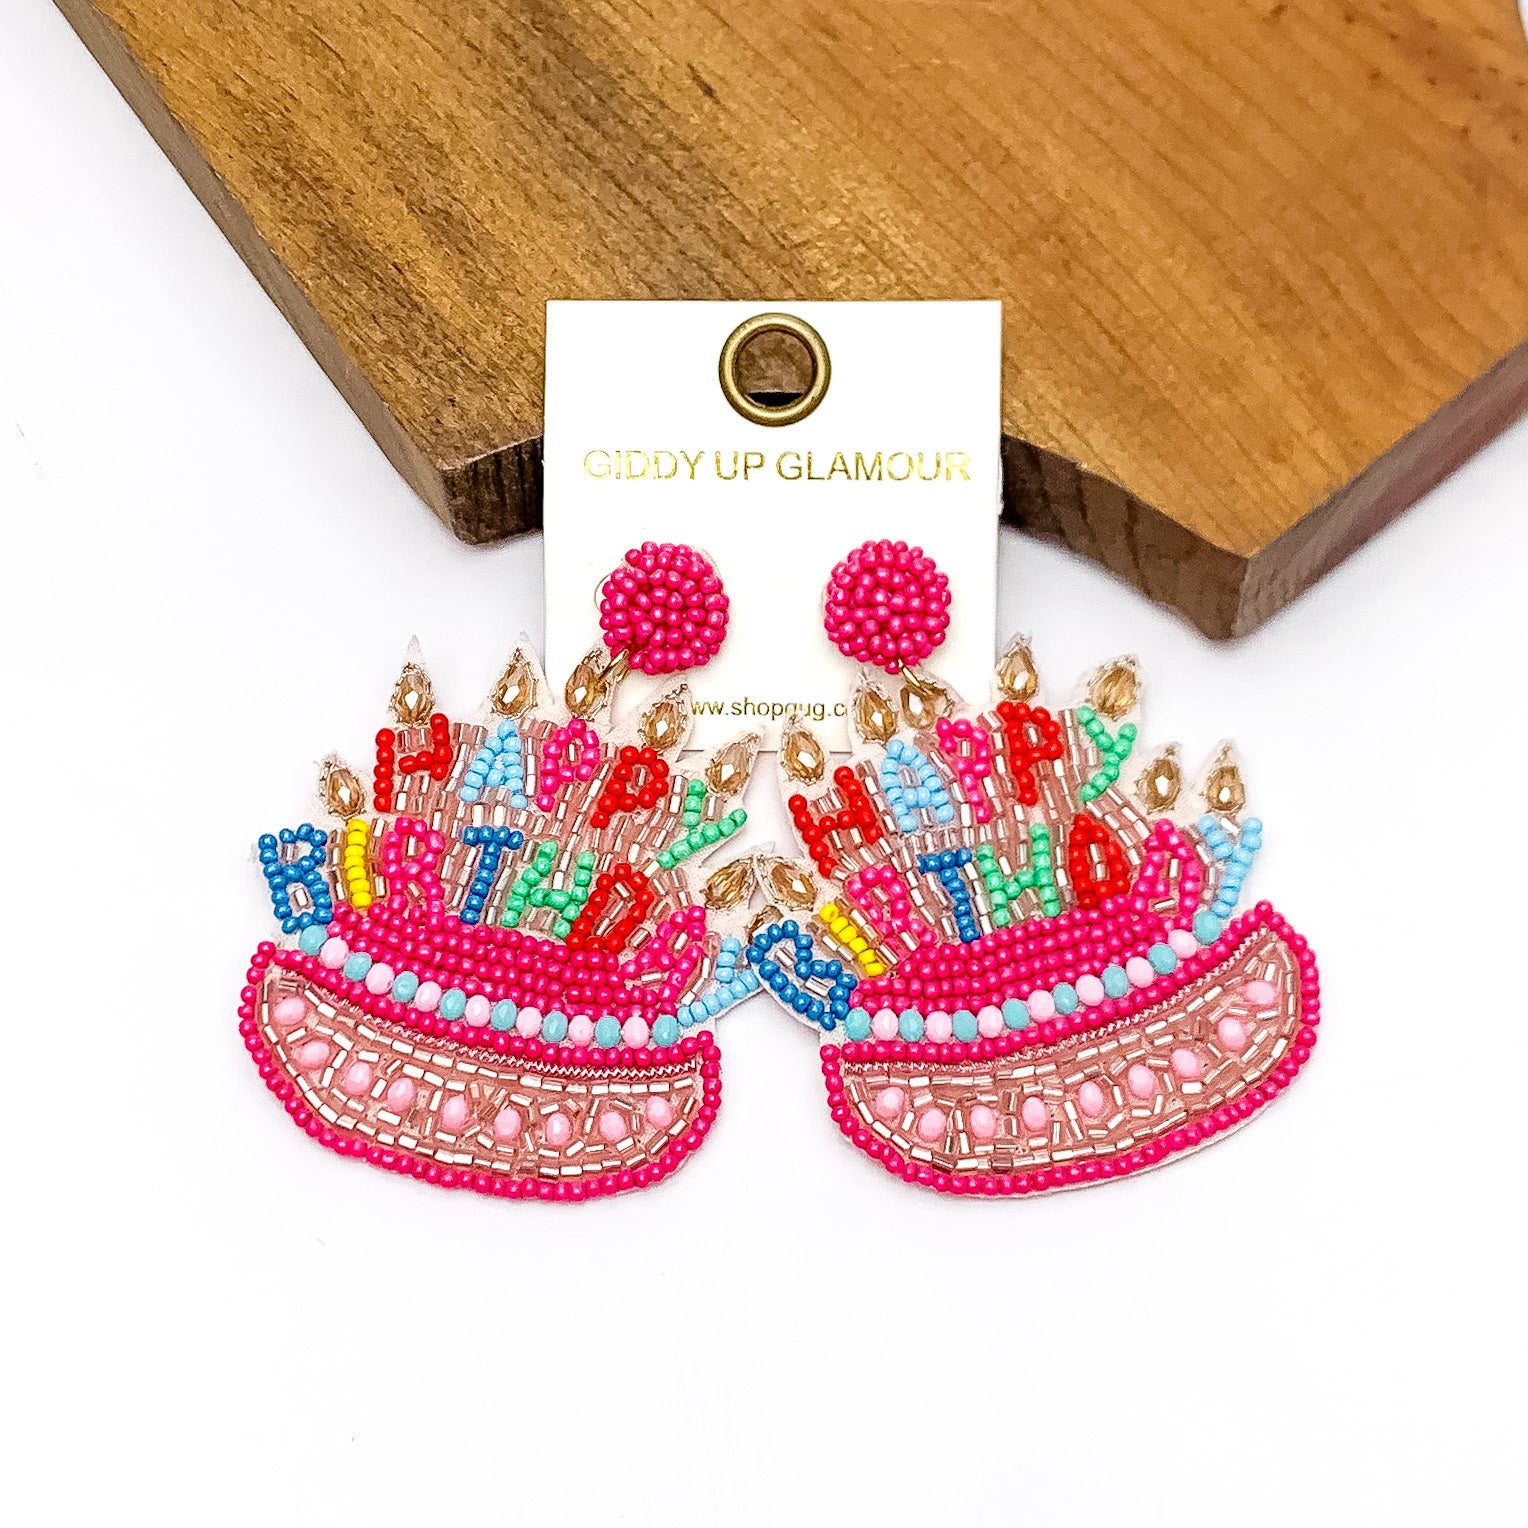 Happy Birthday Cake Beaded Earrings in Pink. Pictured on a white background with the earrings laying on a piece of wood.